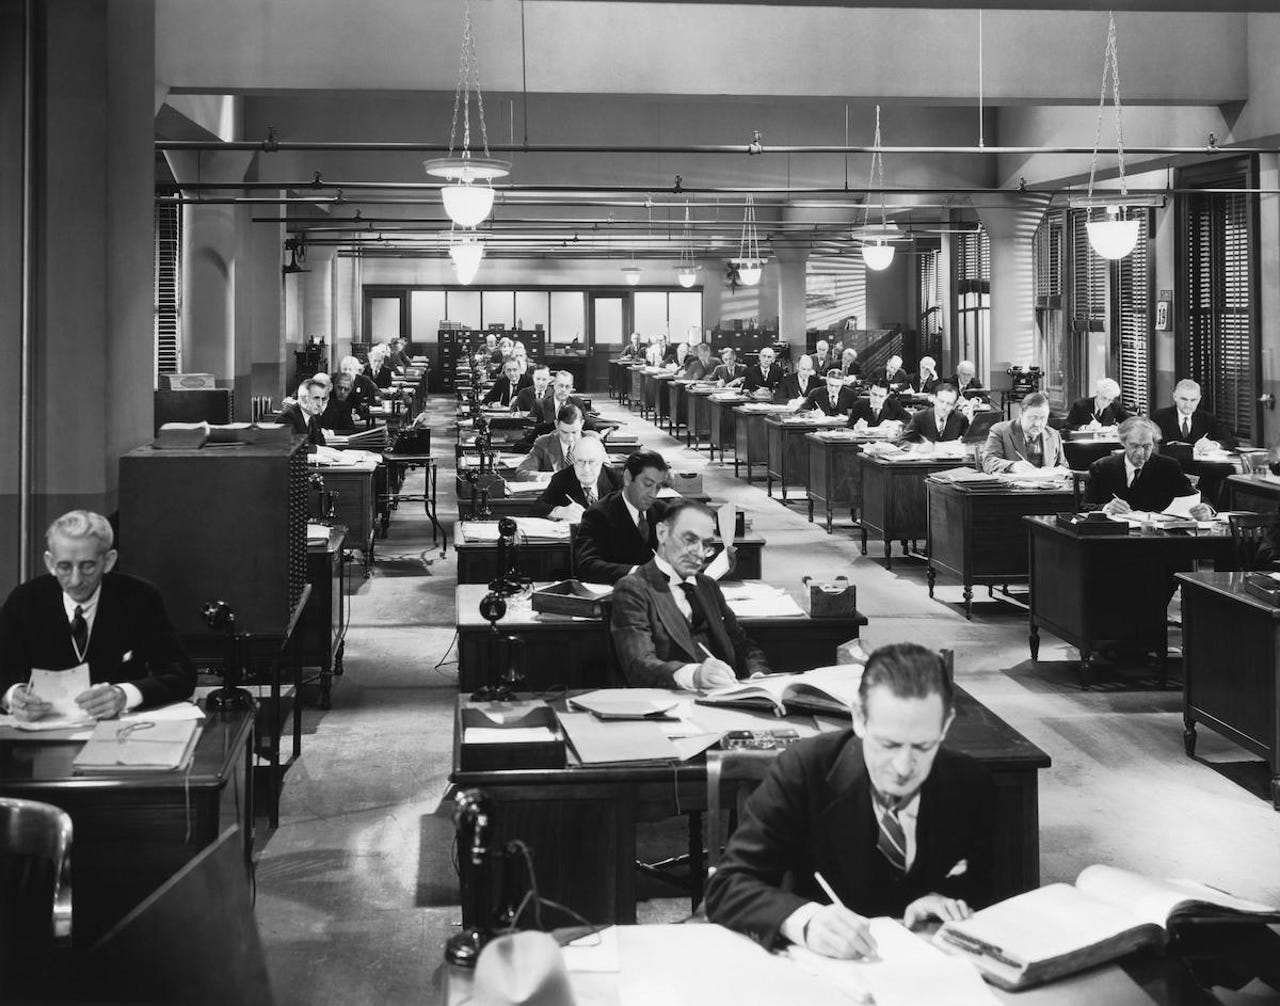 Vintage office building interior with people working at their desks